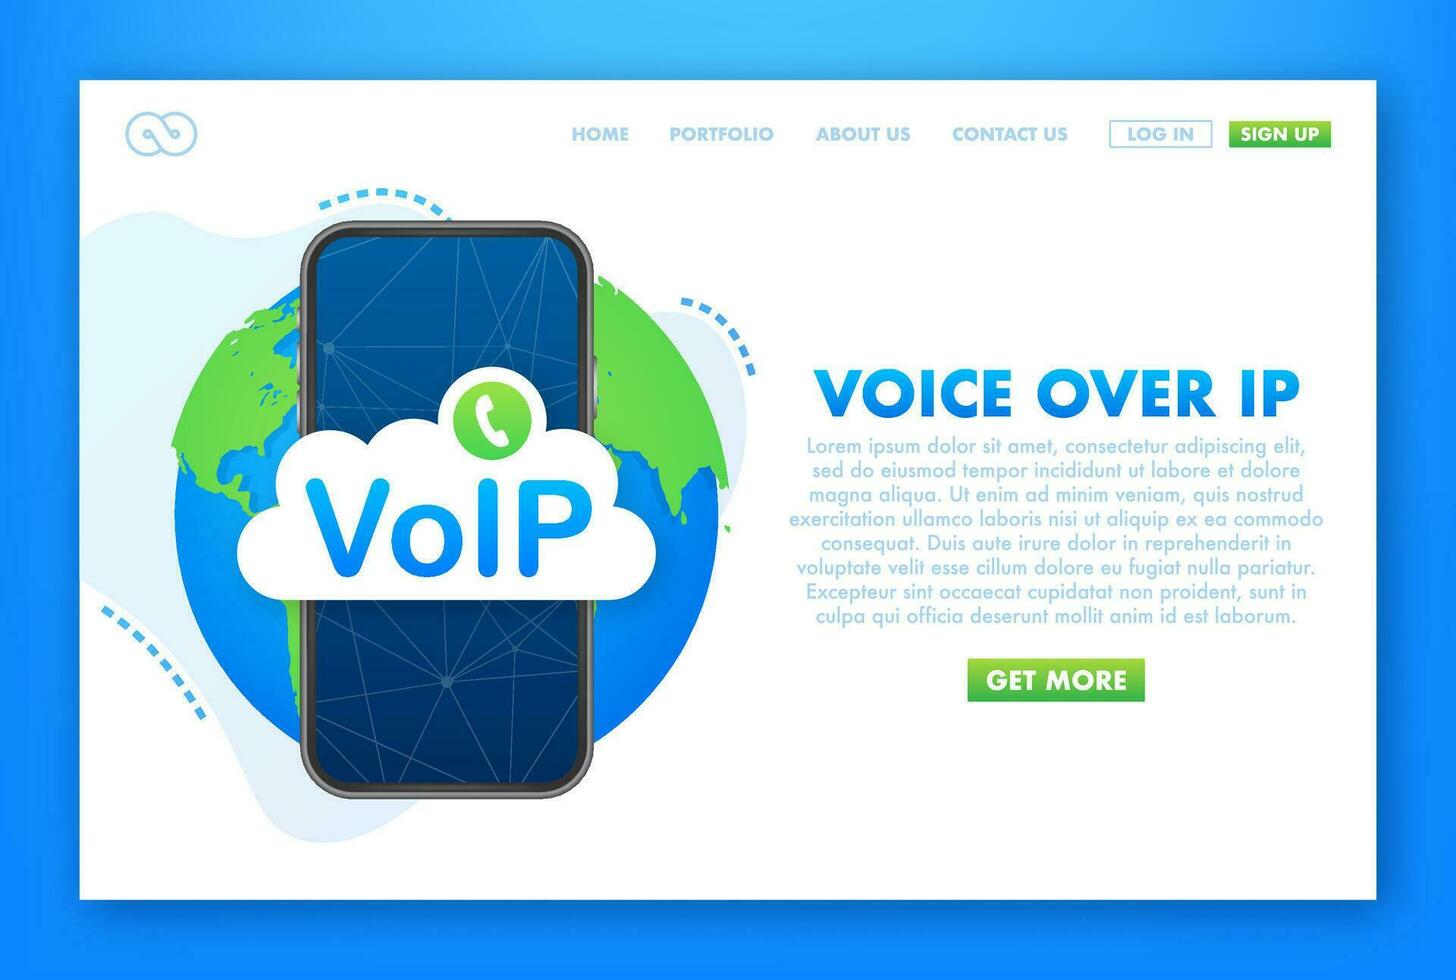 VoIP technology, voice over IP. Internet calling banner. Vector illustration.